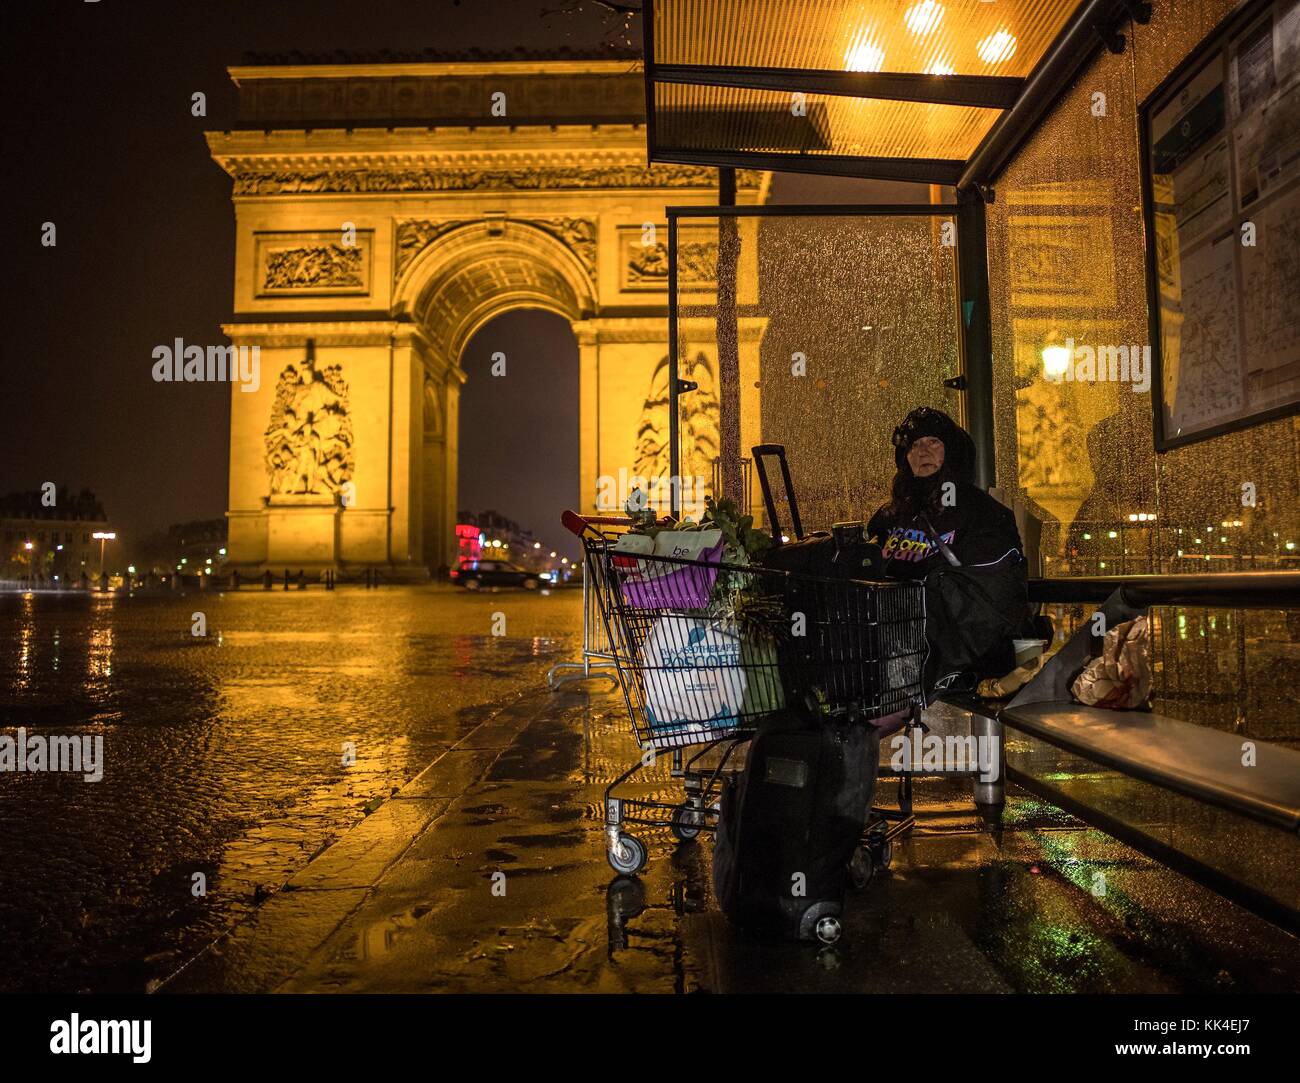 Hell in  france -  04/12/2012  -  France / Ile-de-France (region) / Paris  -  Jenny spends her night as usual for years at the foot of the Arc de Triomphe in the fall   -  Sylvain Leser / Le Pictorium Stock Photo